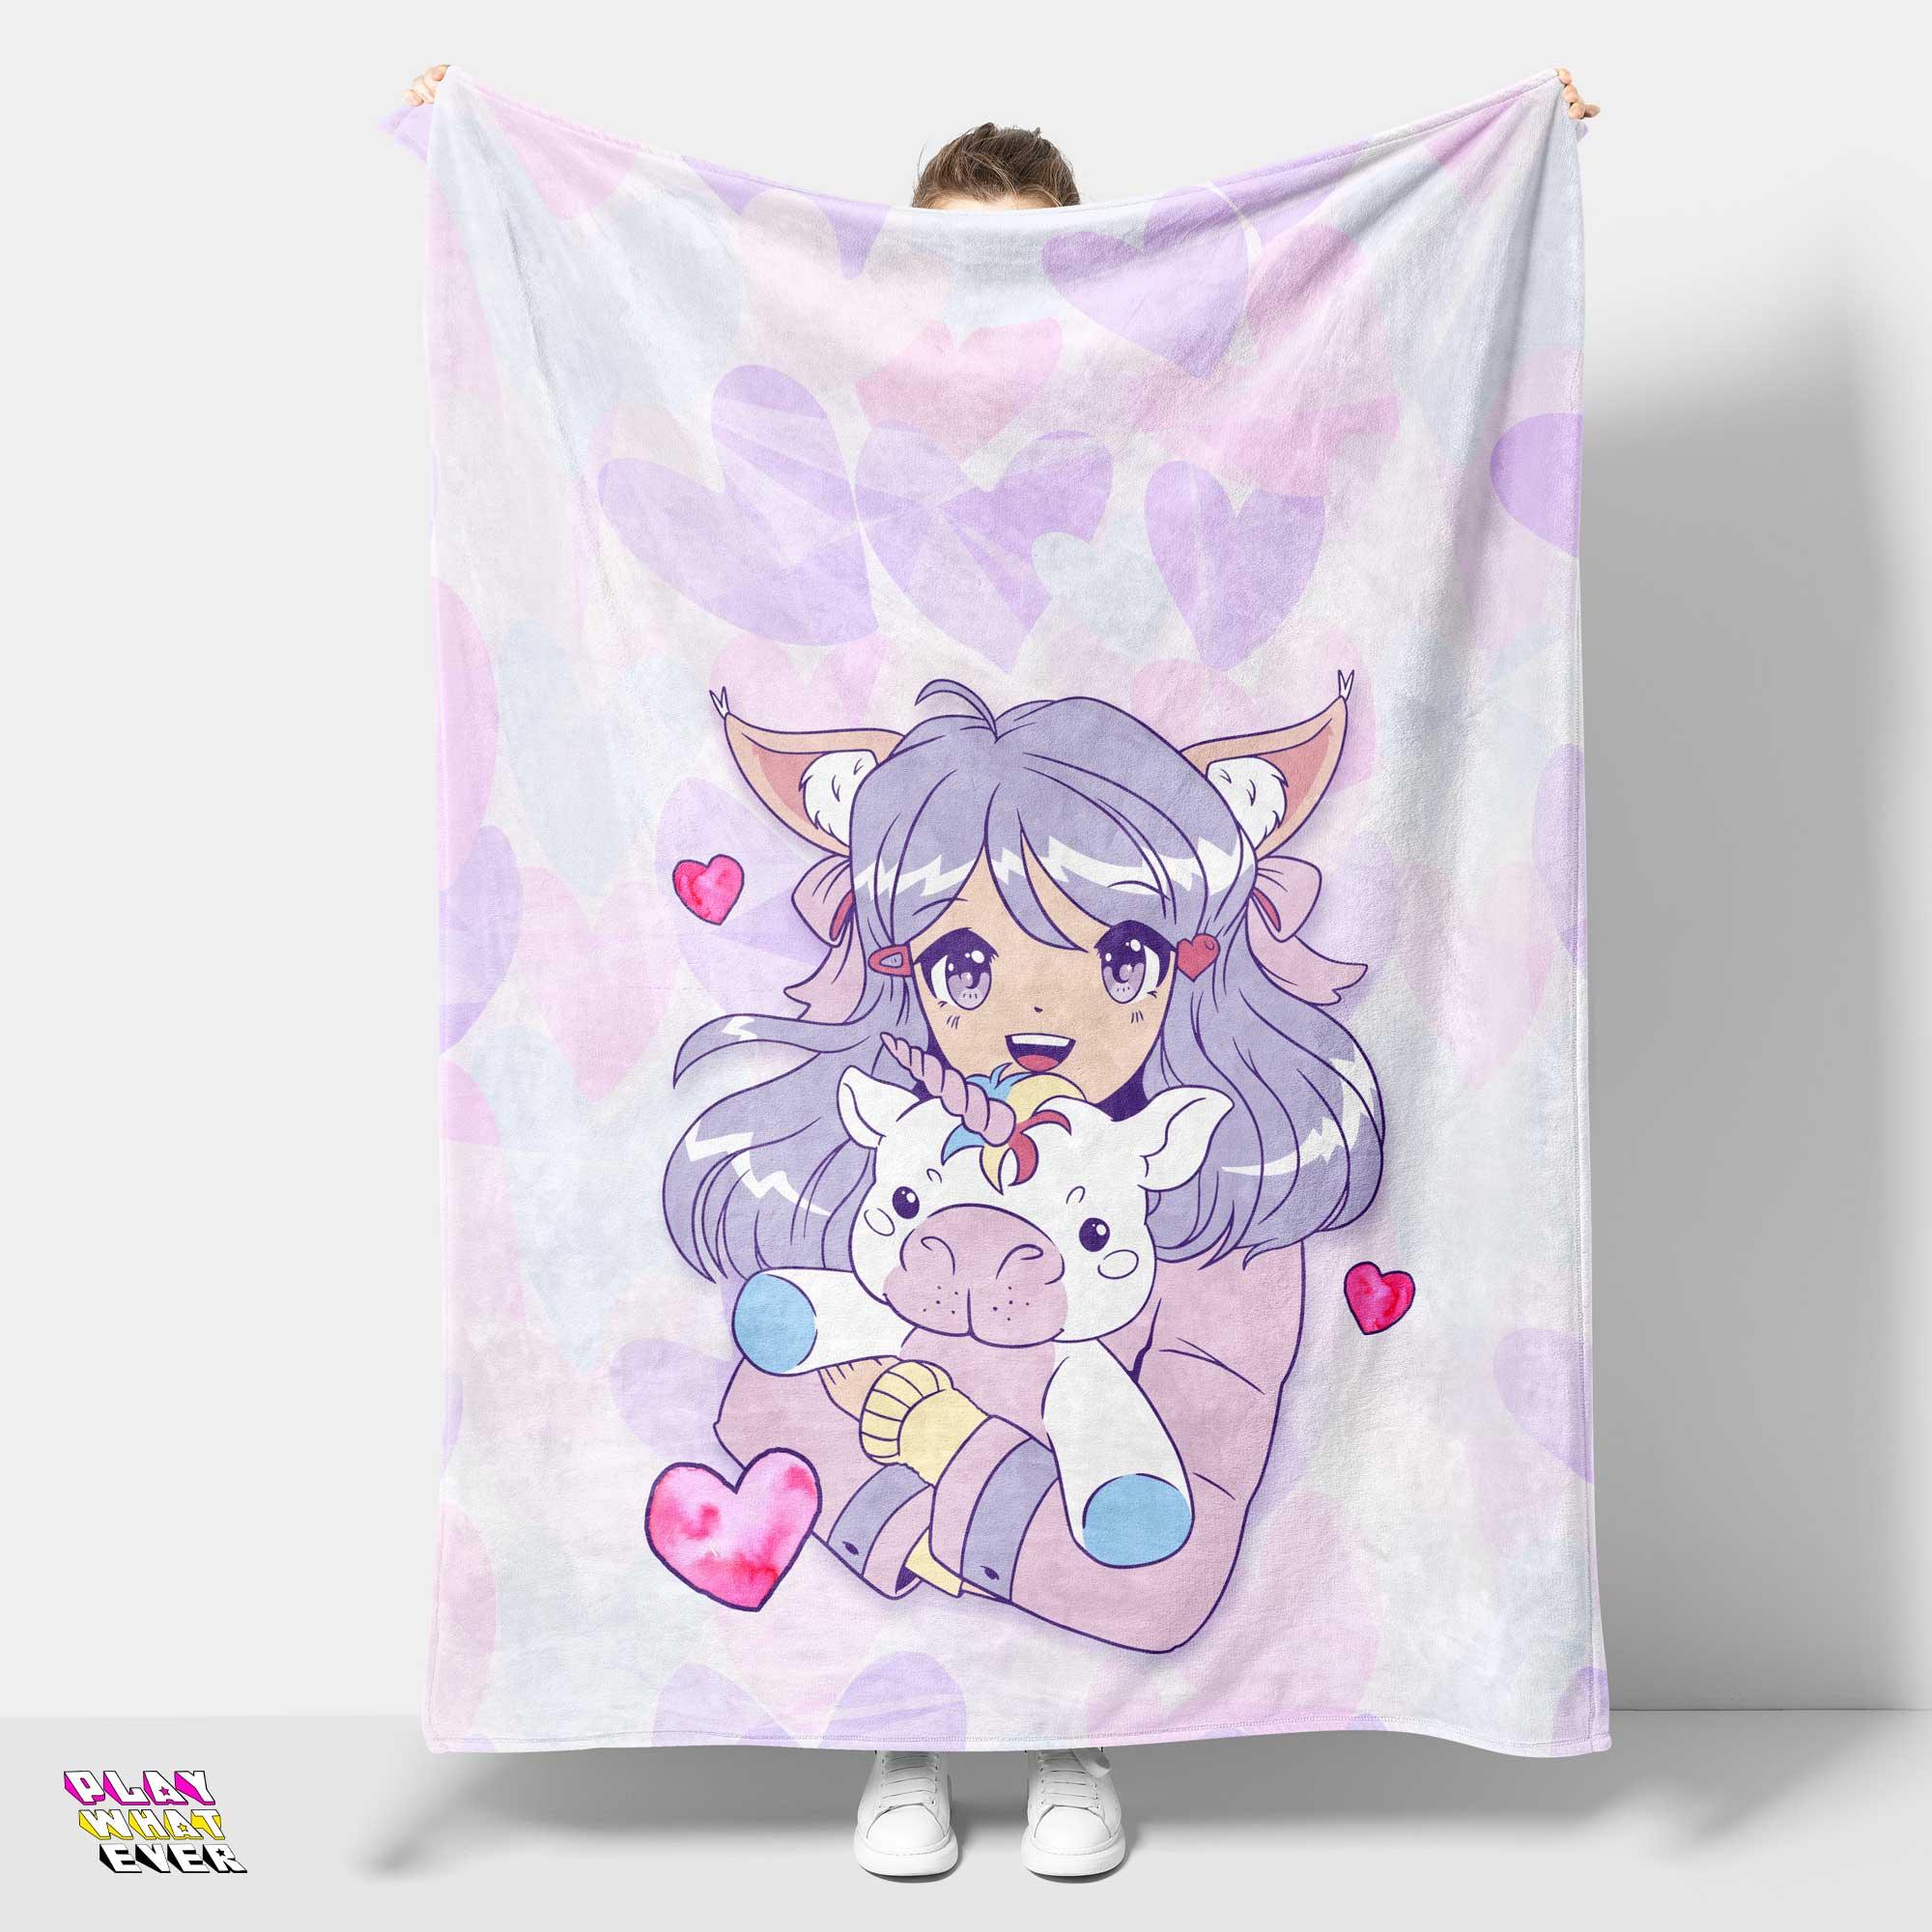 Complete Your Bedroom With A Stylish anime hoodie blanket - Alibaba.com